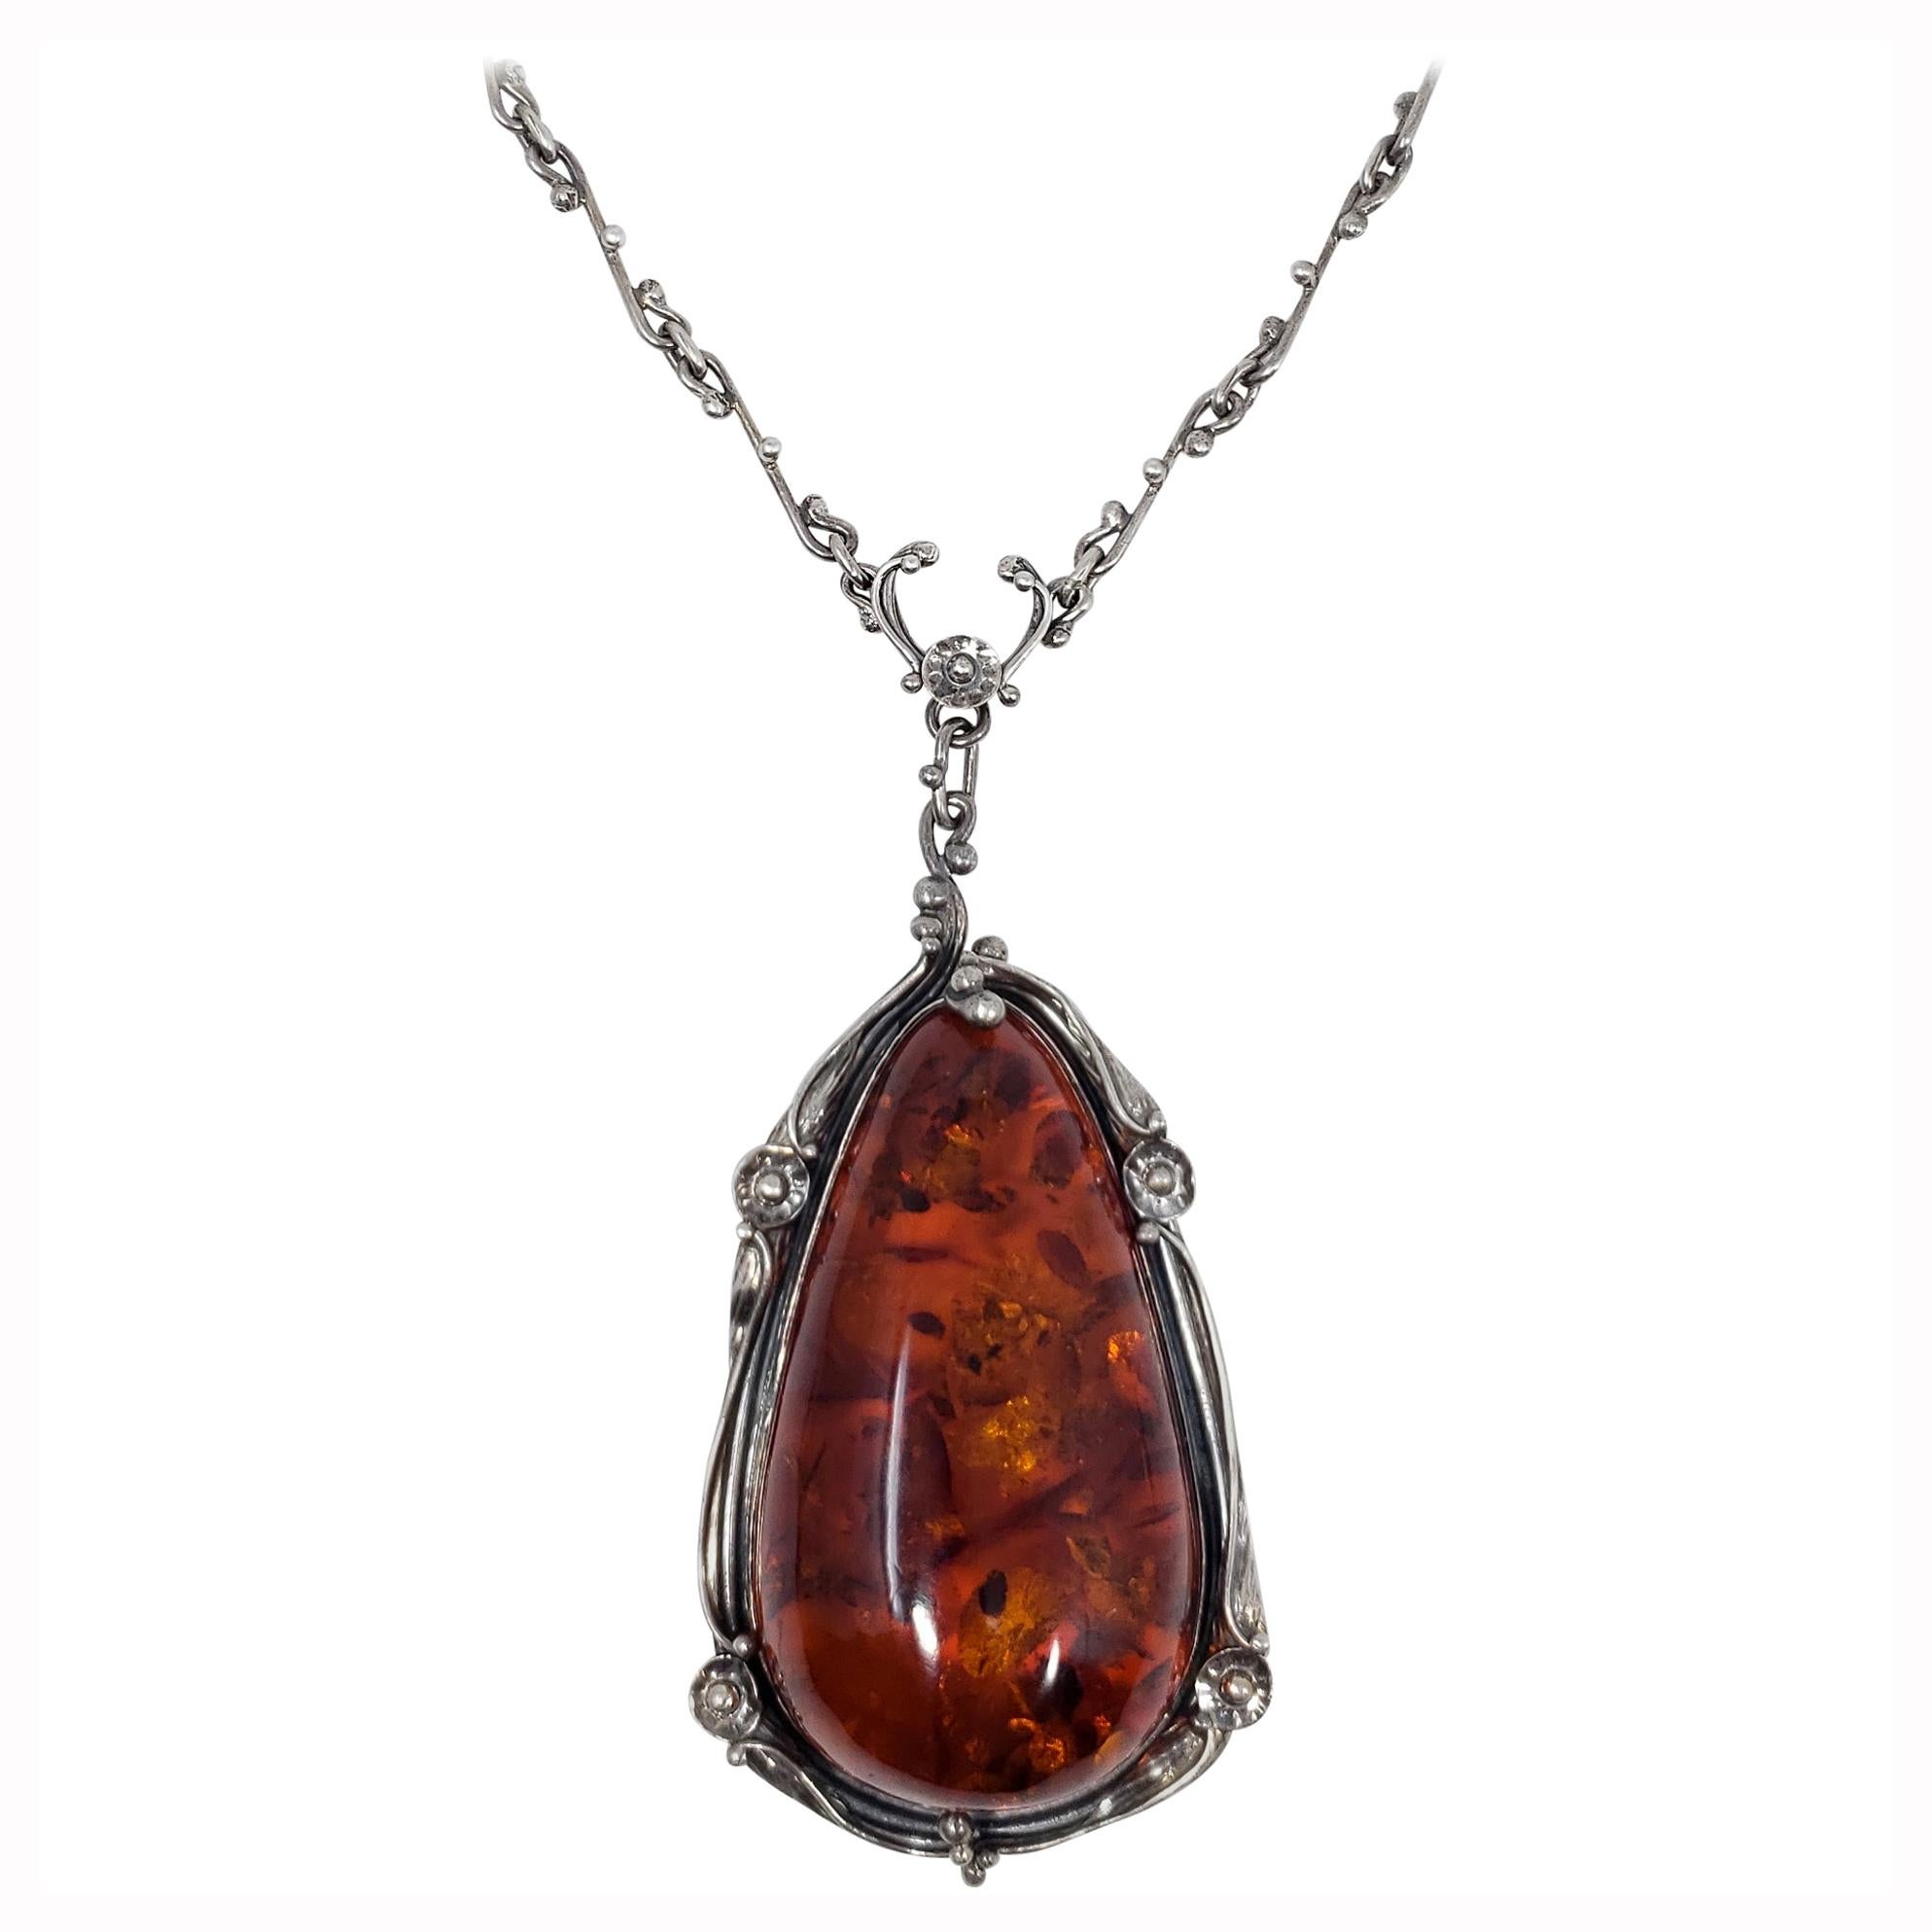 Vintage Russian Baltic Amber Pendant Necklace Sterling Silver Necklace and Bezel